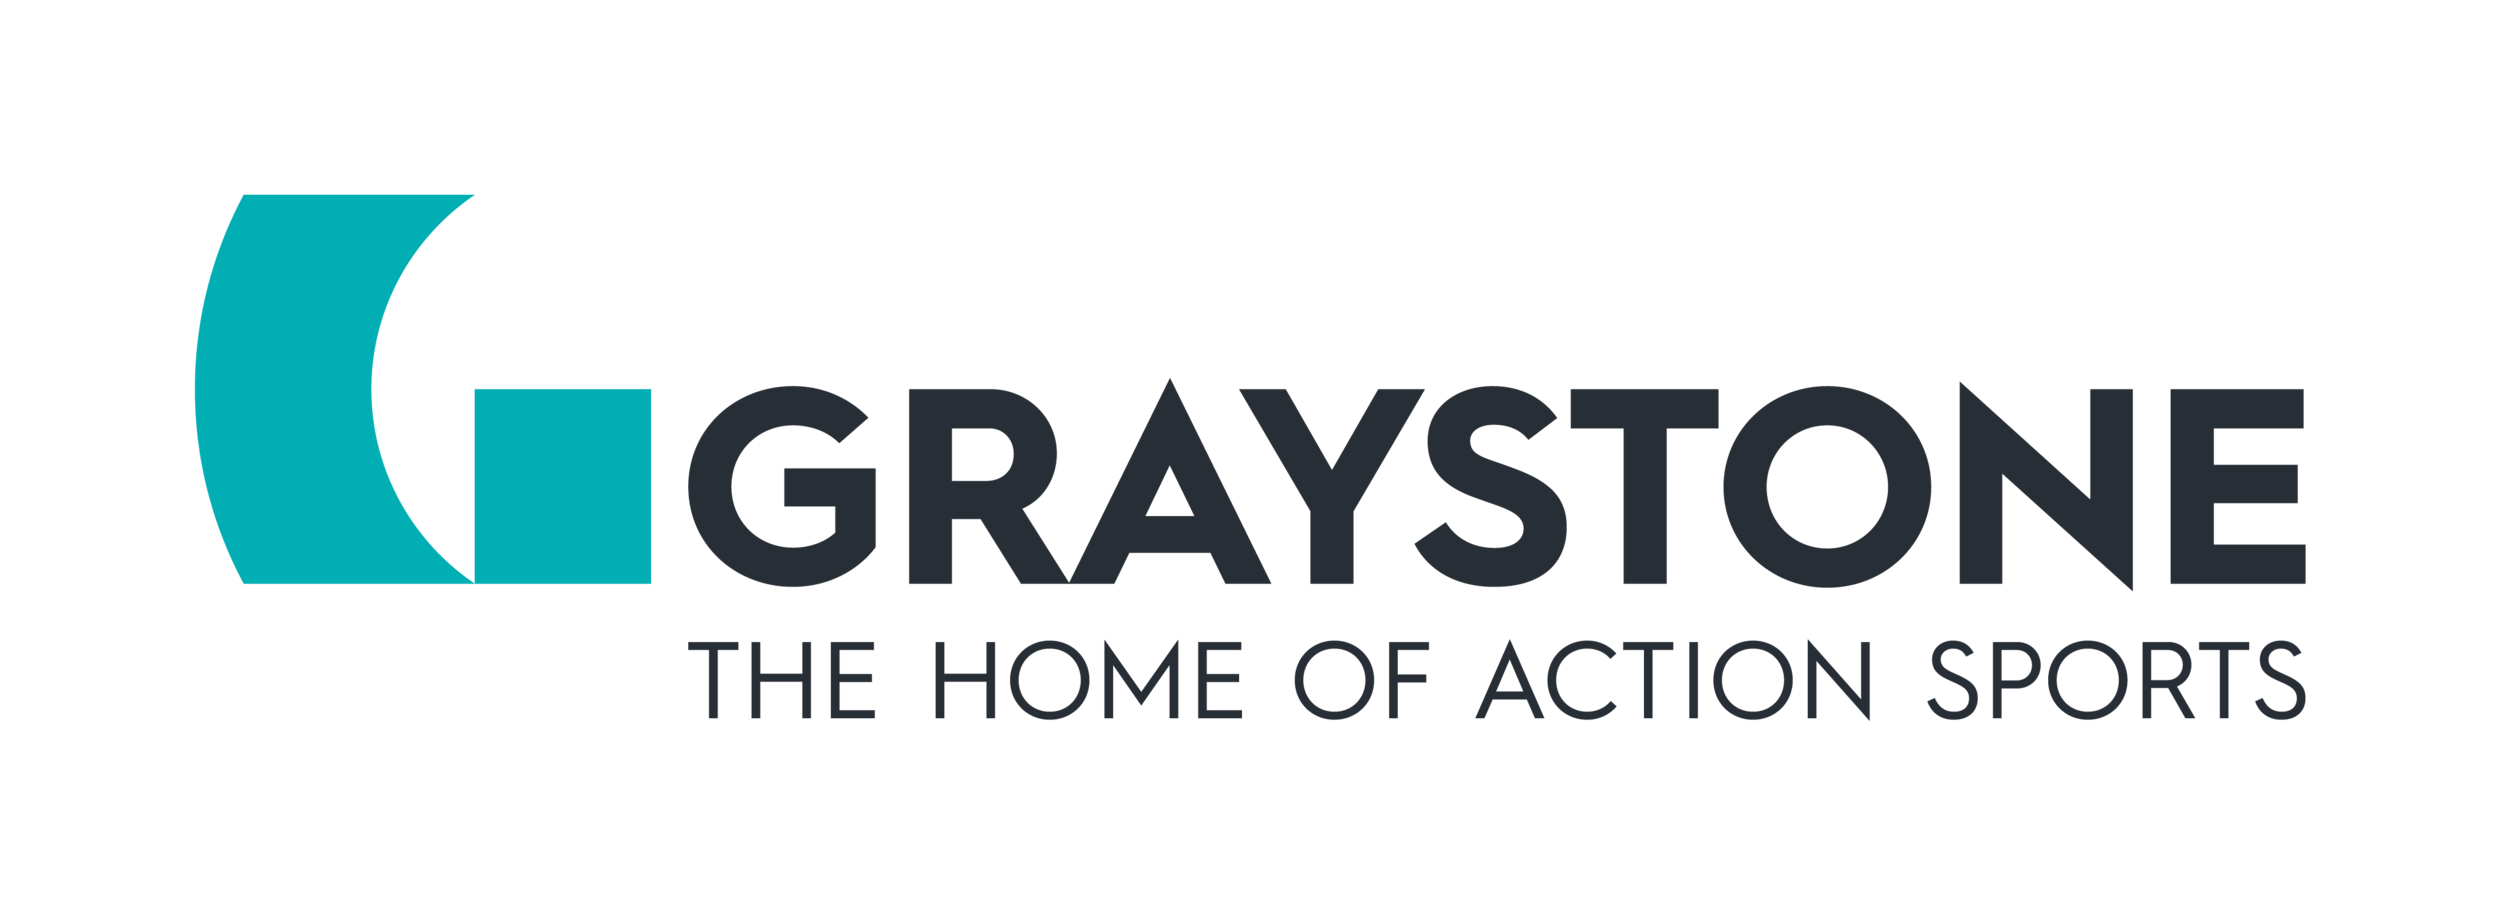 Graystone Action Sports